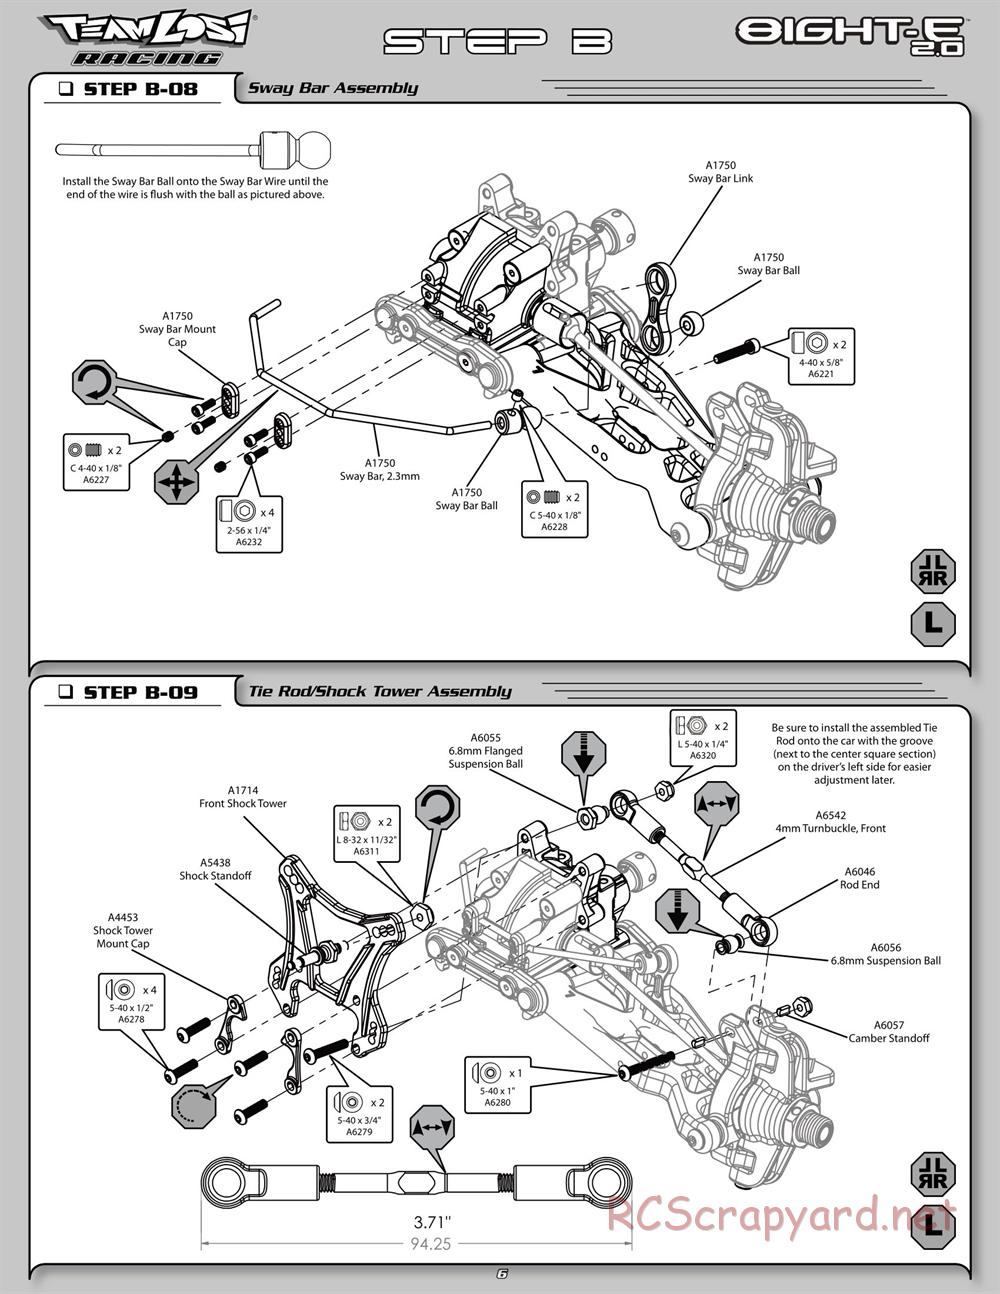 Team Losi - 8ight-E 2.0 Race Roller - Manual - Page 13